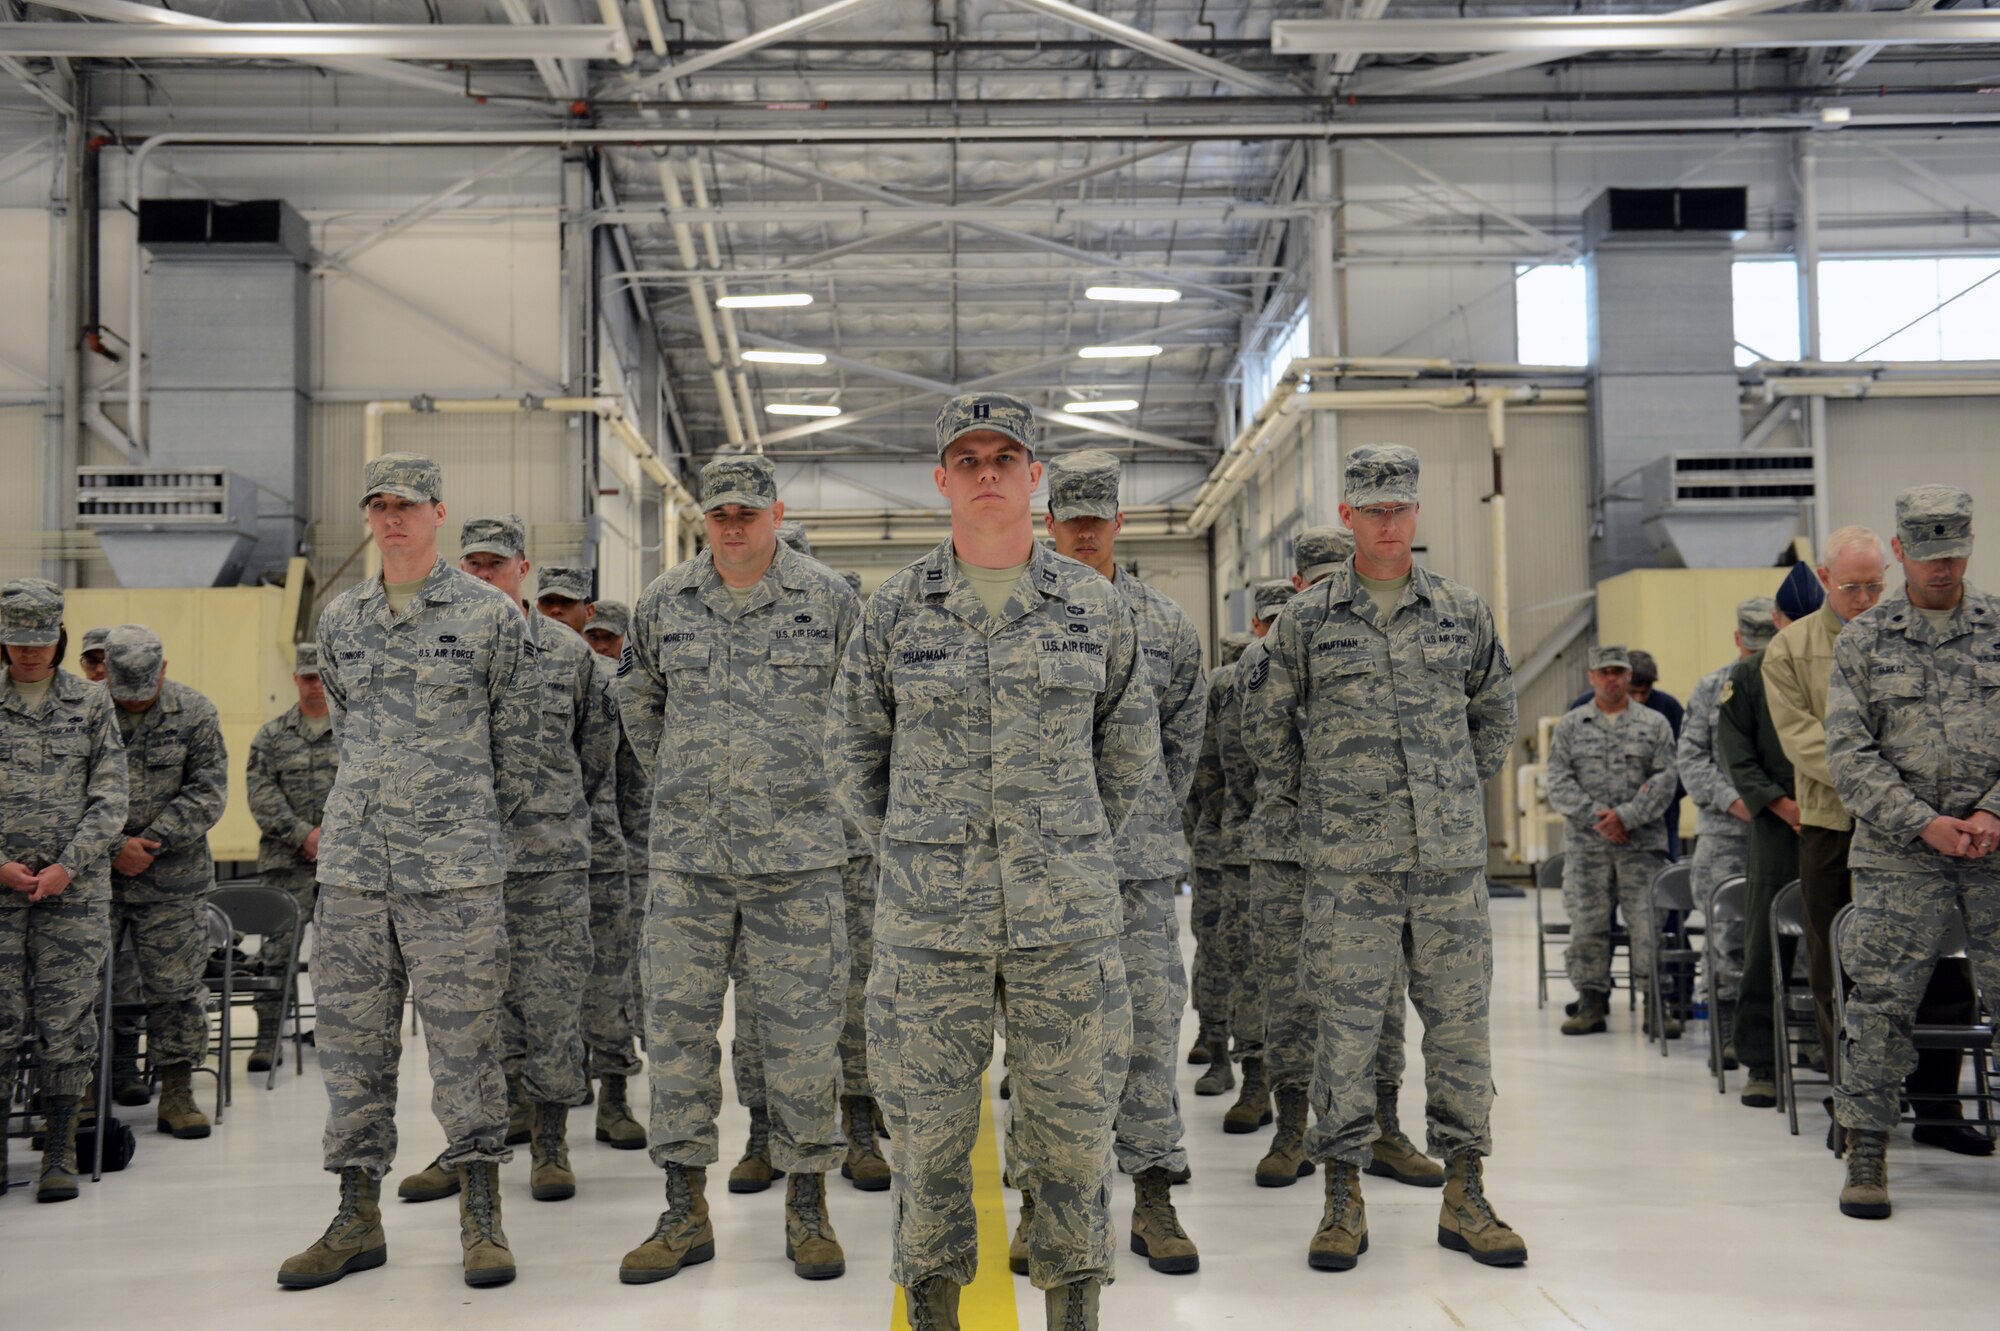 Capt. Benjamin Chapman, 62nd Maintenance Group maintenance operations officer in charge, leads the a formation during the 62nd Maintenance Operations Squadron Deactivation Ceremony May 13, 2013 at Joint Base Lewis-McChord, Wash. The 62nd MOS has a history of notable achievements, including earning the Air Force Meritorious Unit Award for the period Sept. 11, 2001 through Sept. 10, 2003, as well as the Air Force Outstanding Unit Awards eight times since 1996. (U.S. Air Force photo/Staff Sgt. Jason Truskowski)